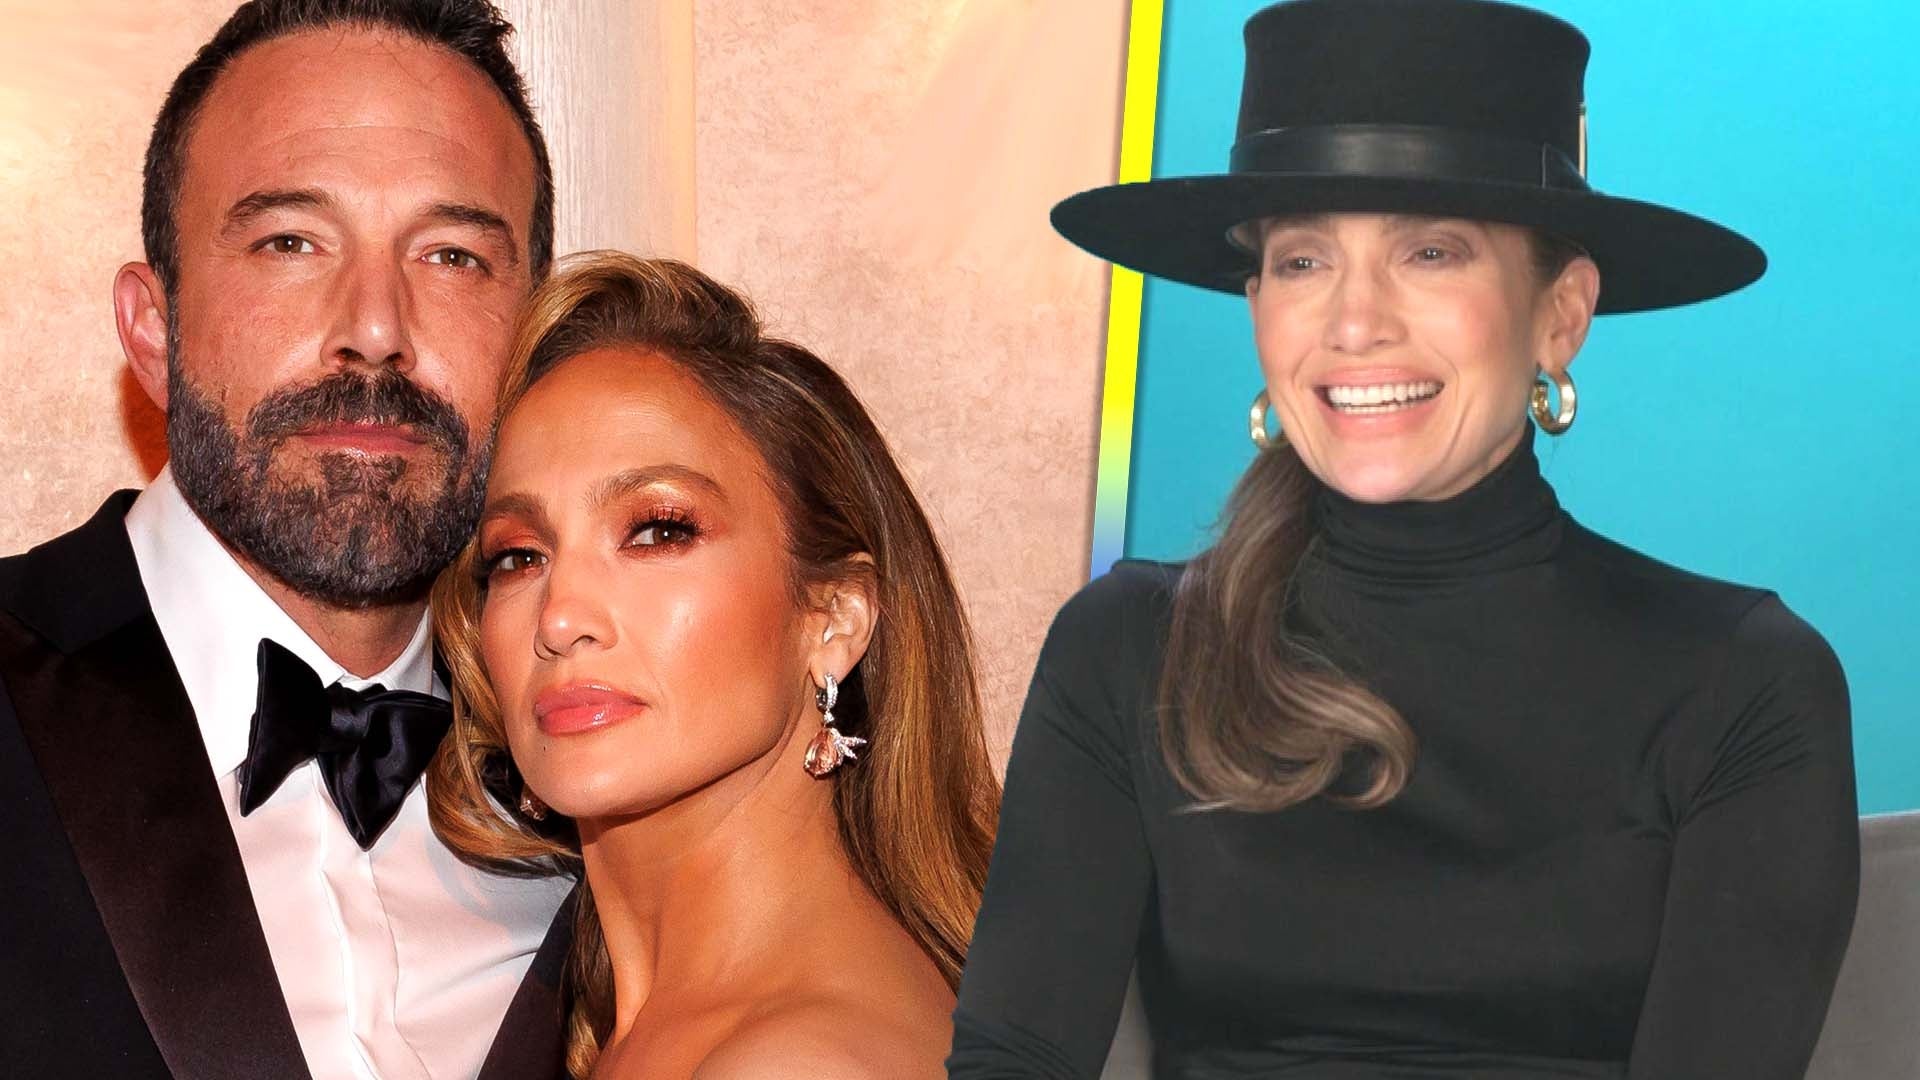 Jennifer Lopez Shares How Ben Affleck Inspired Her Return to Music (Exclusive)